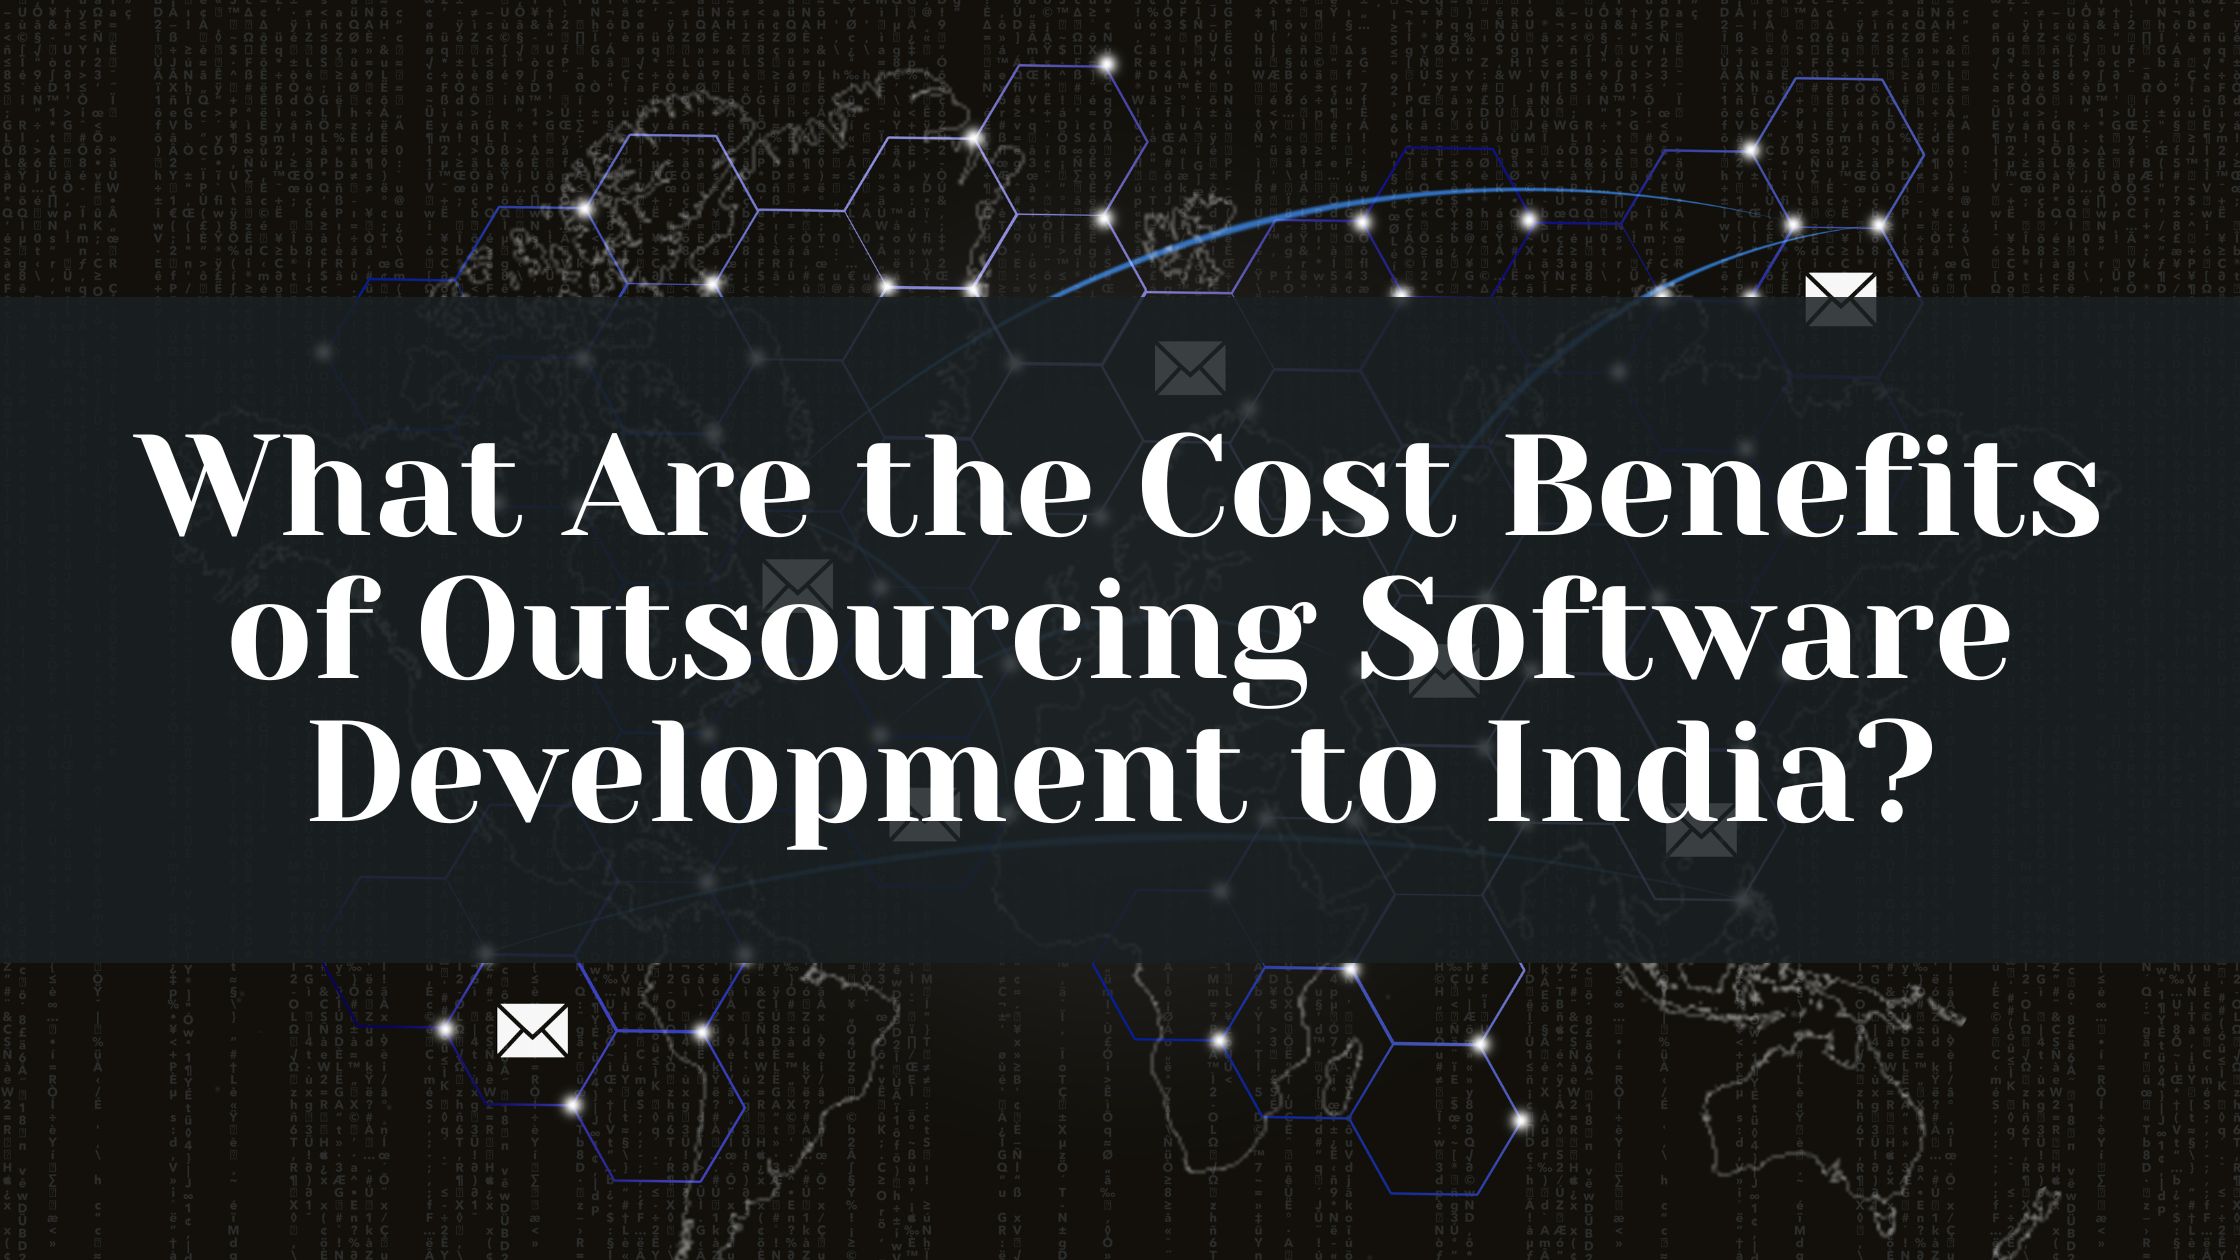 What Are the Cost Benefits of Outsourcing Software Development to India?